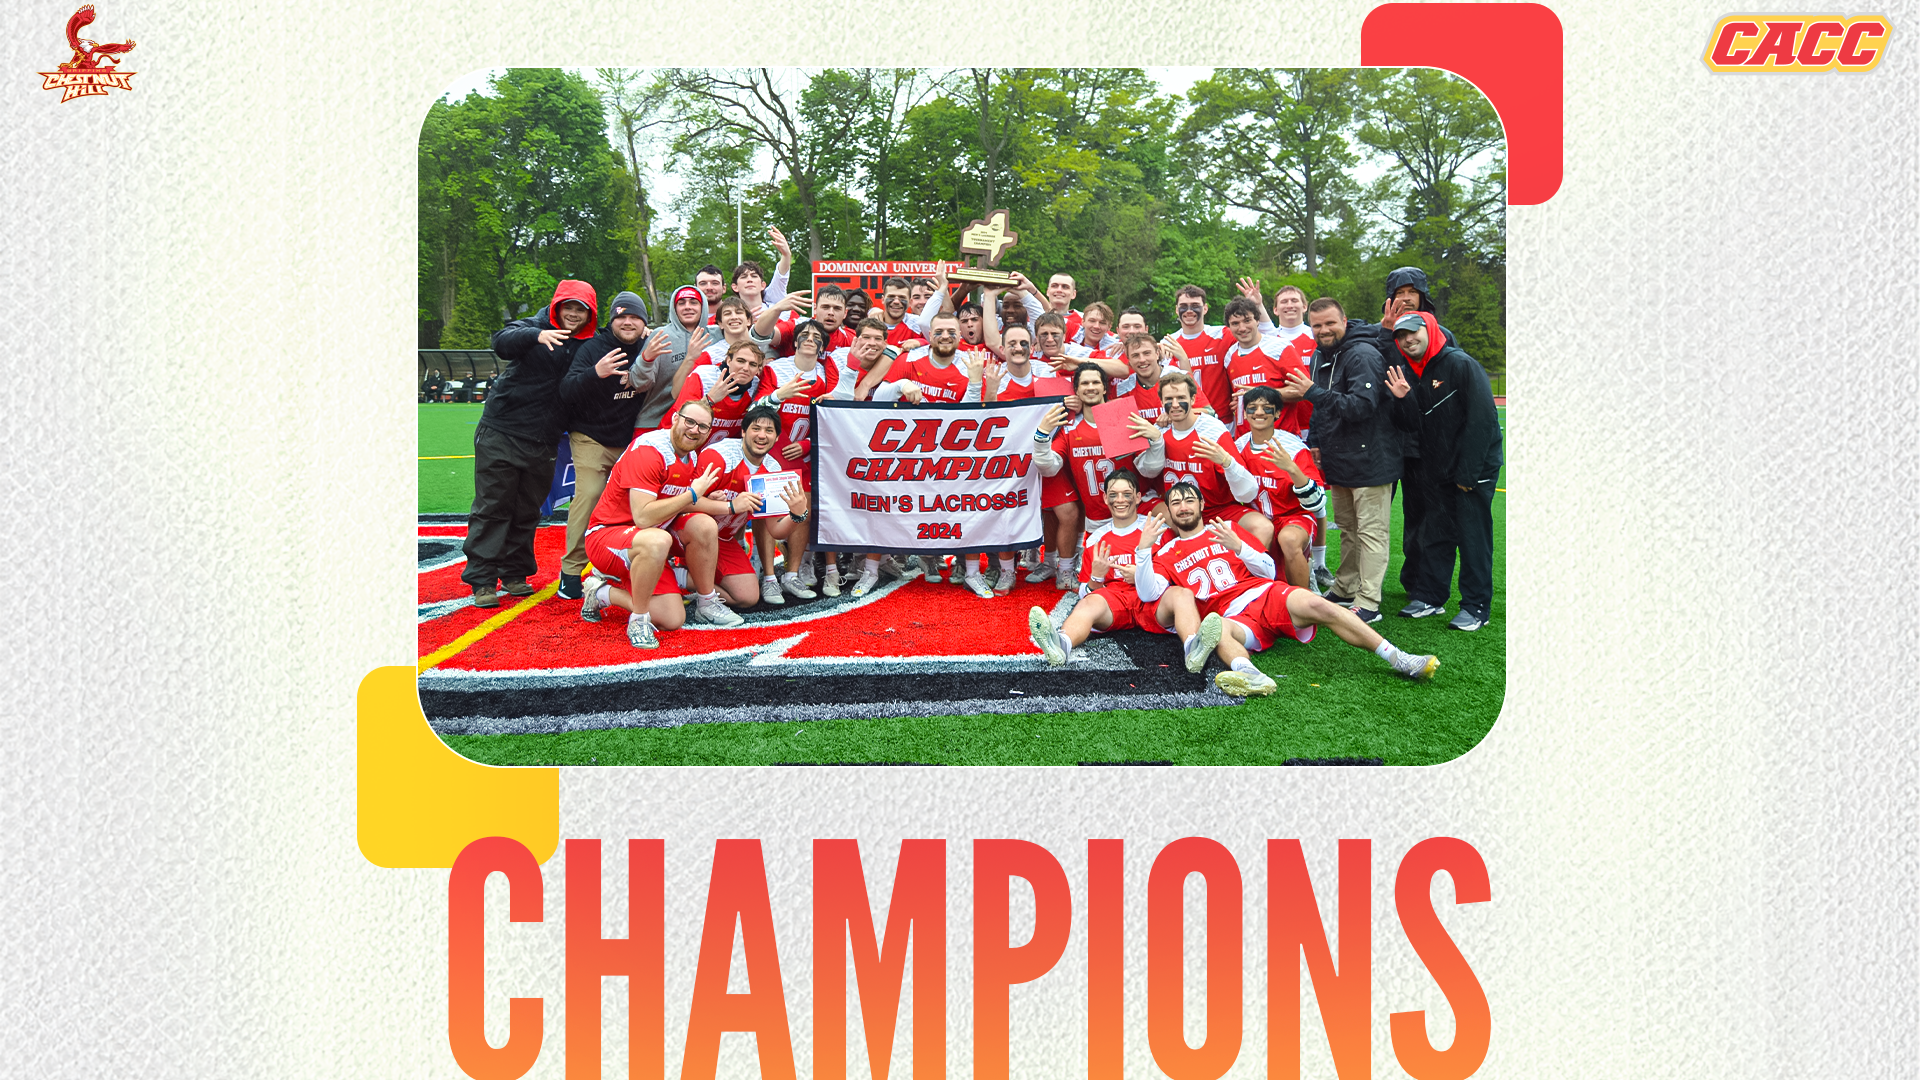 Chestnut Hill Claims 4th Consecutive CACC Men's Lacrosse Championship